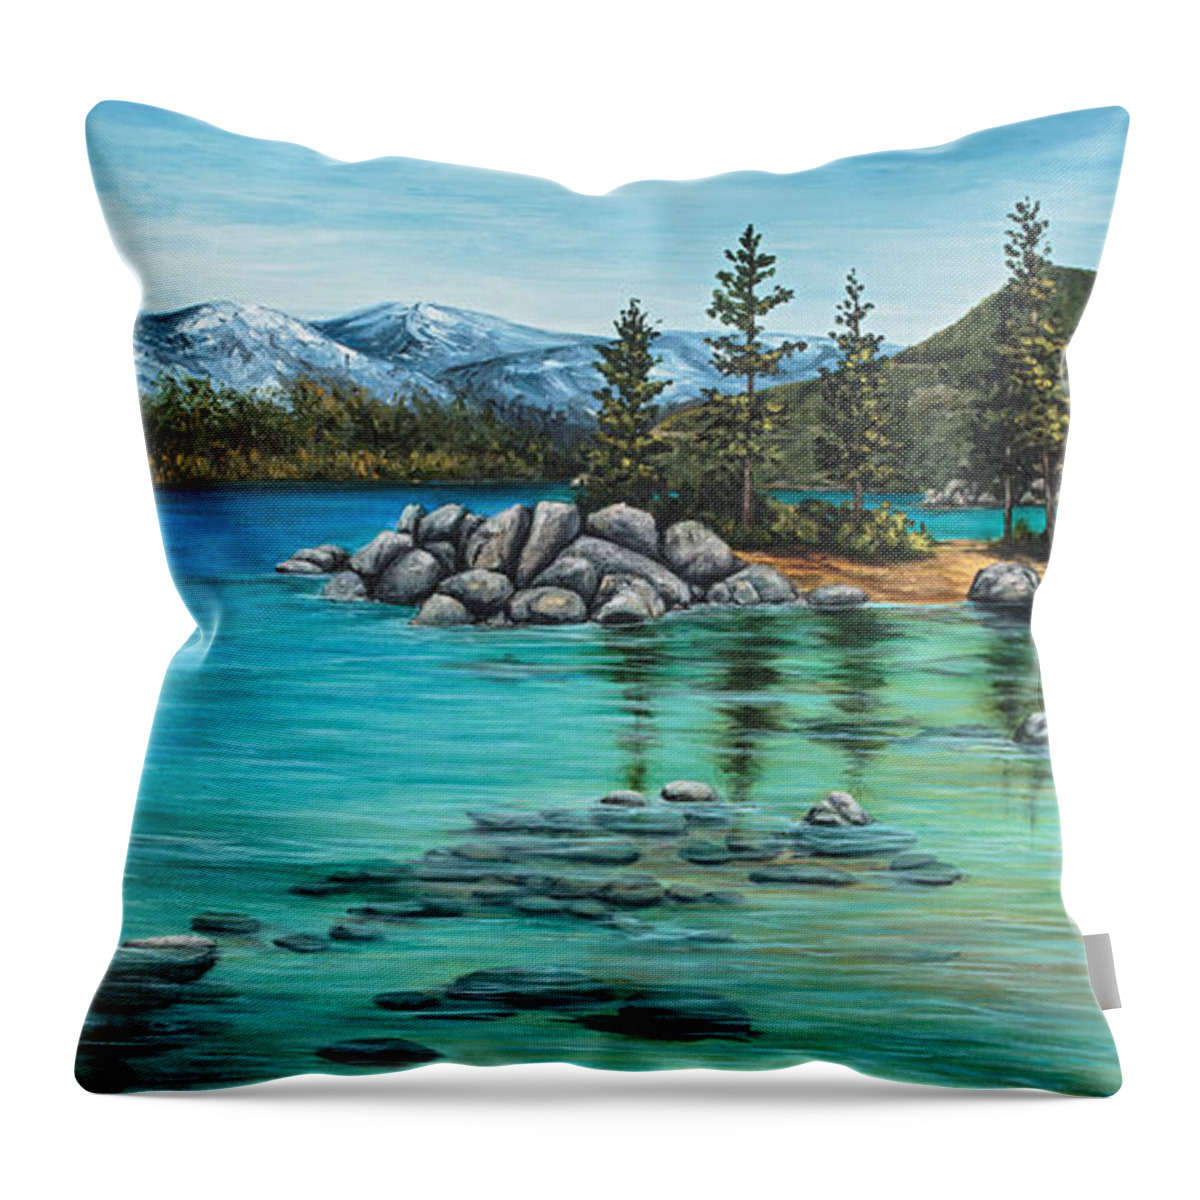 Landscape Throw Pillow featuring the painting Sand Harbor by Darice Machel McGuire